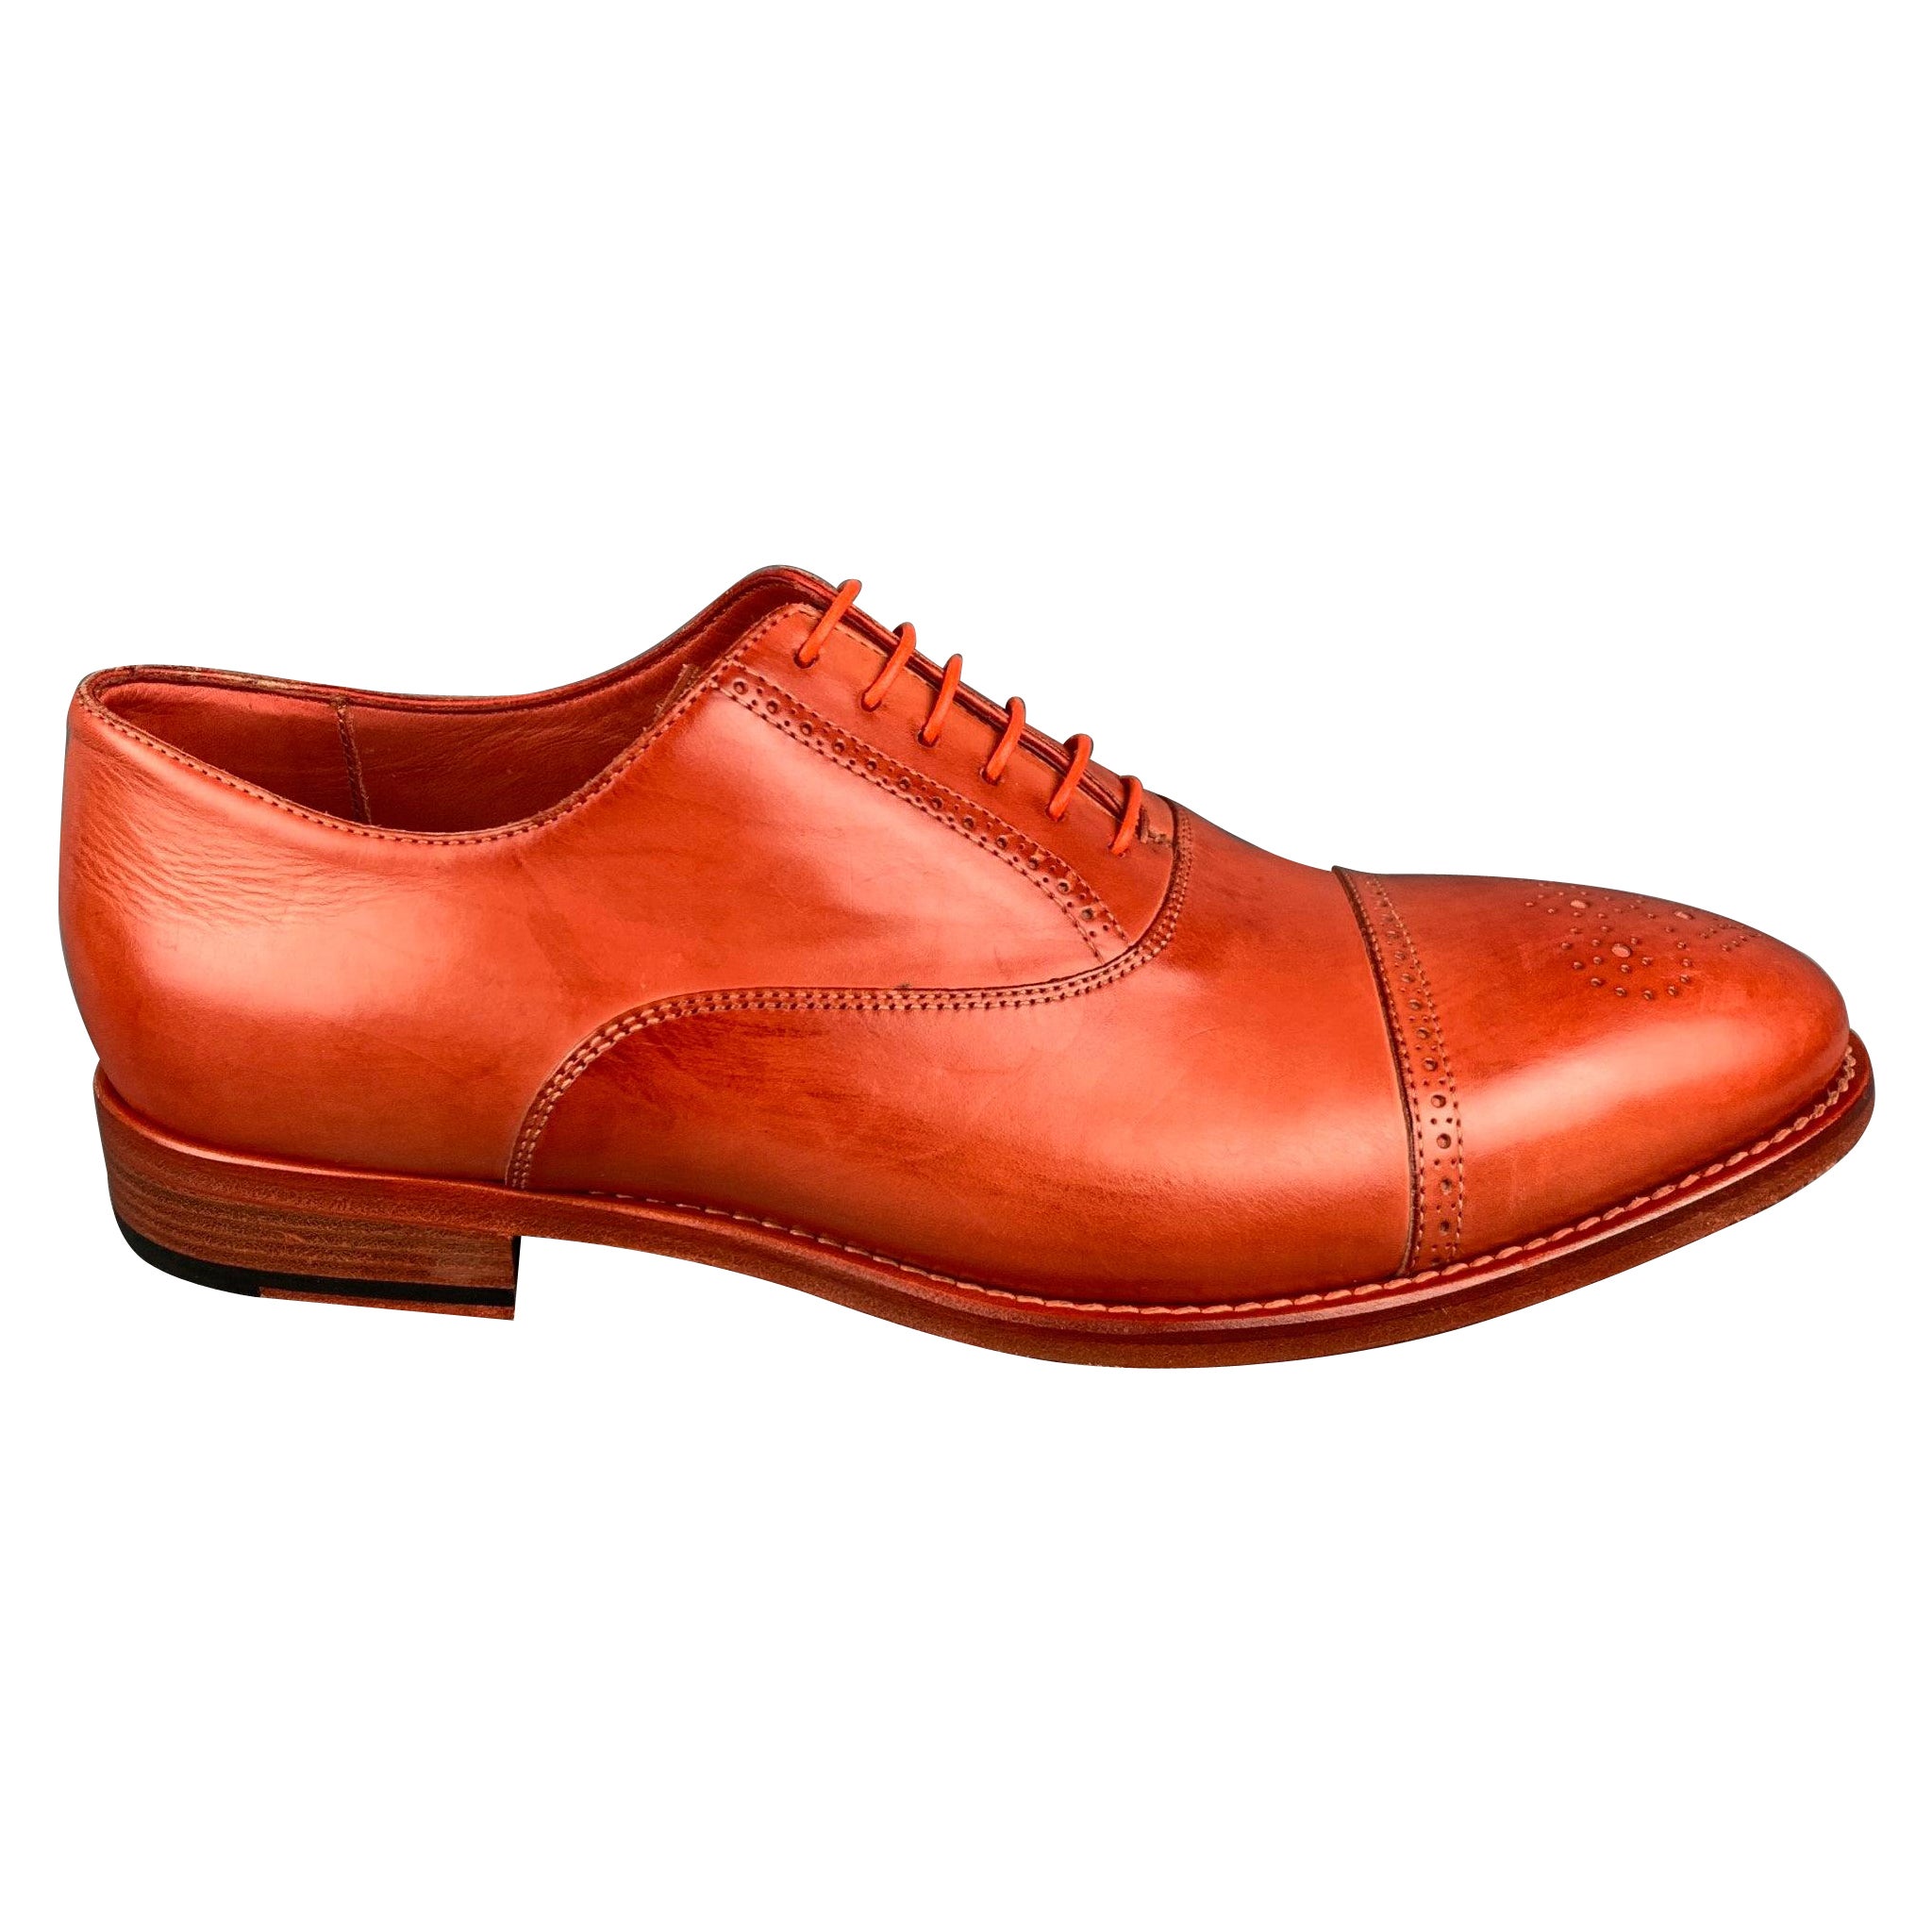 PAUL SMITH Size 8.5 Orange Perforated Leather Cap Toe Lace Up Shoes For Sale